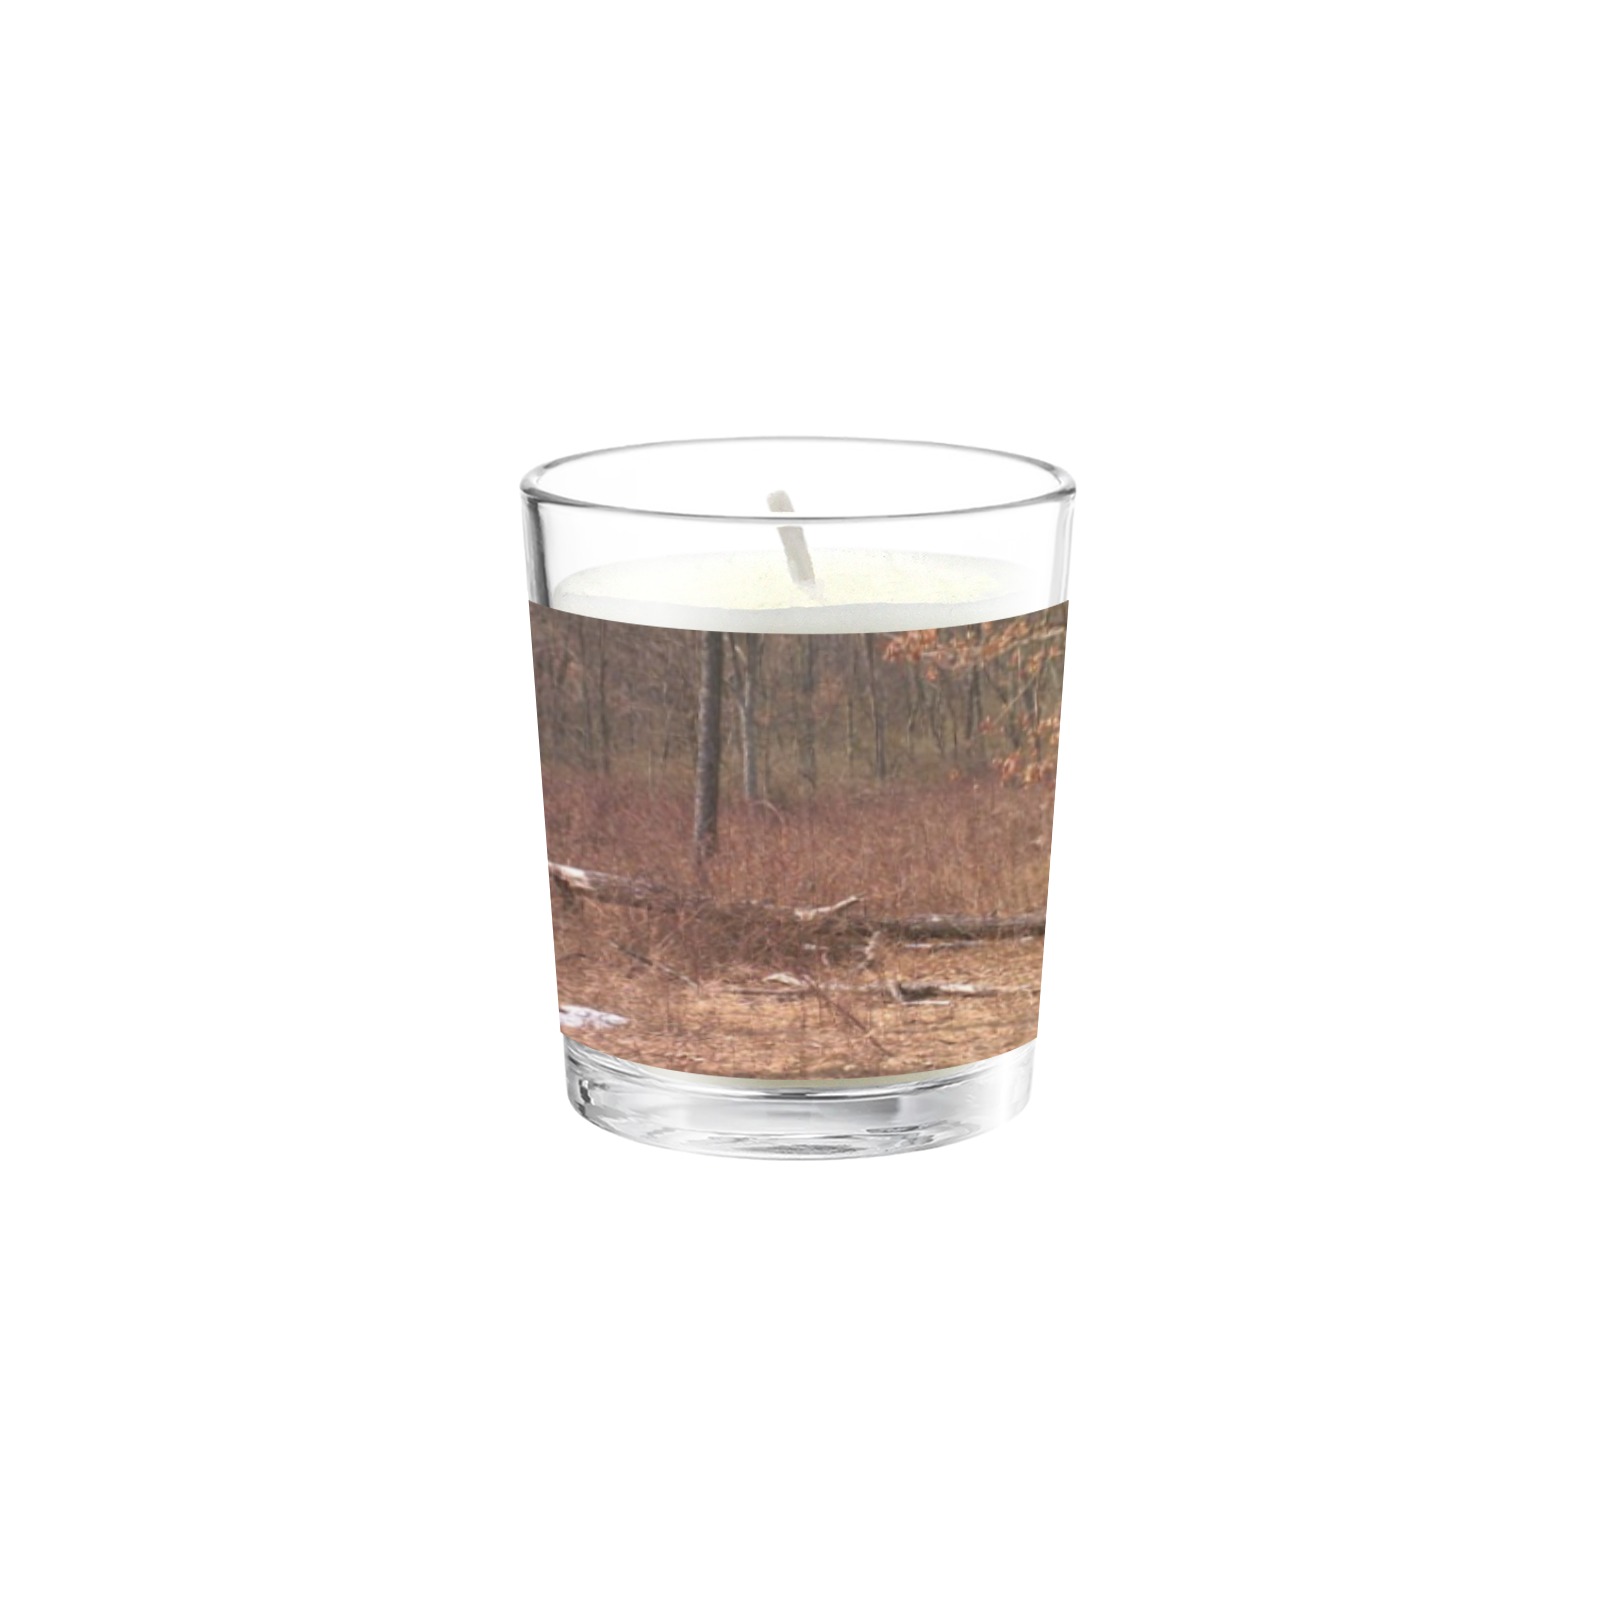 Falling tree in the woods Transparent Candle Cup (Jasmine)